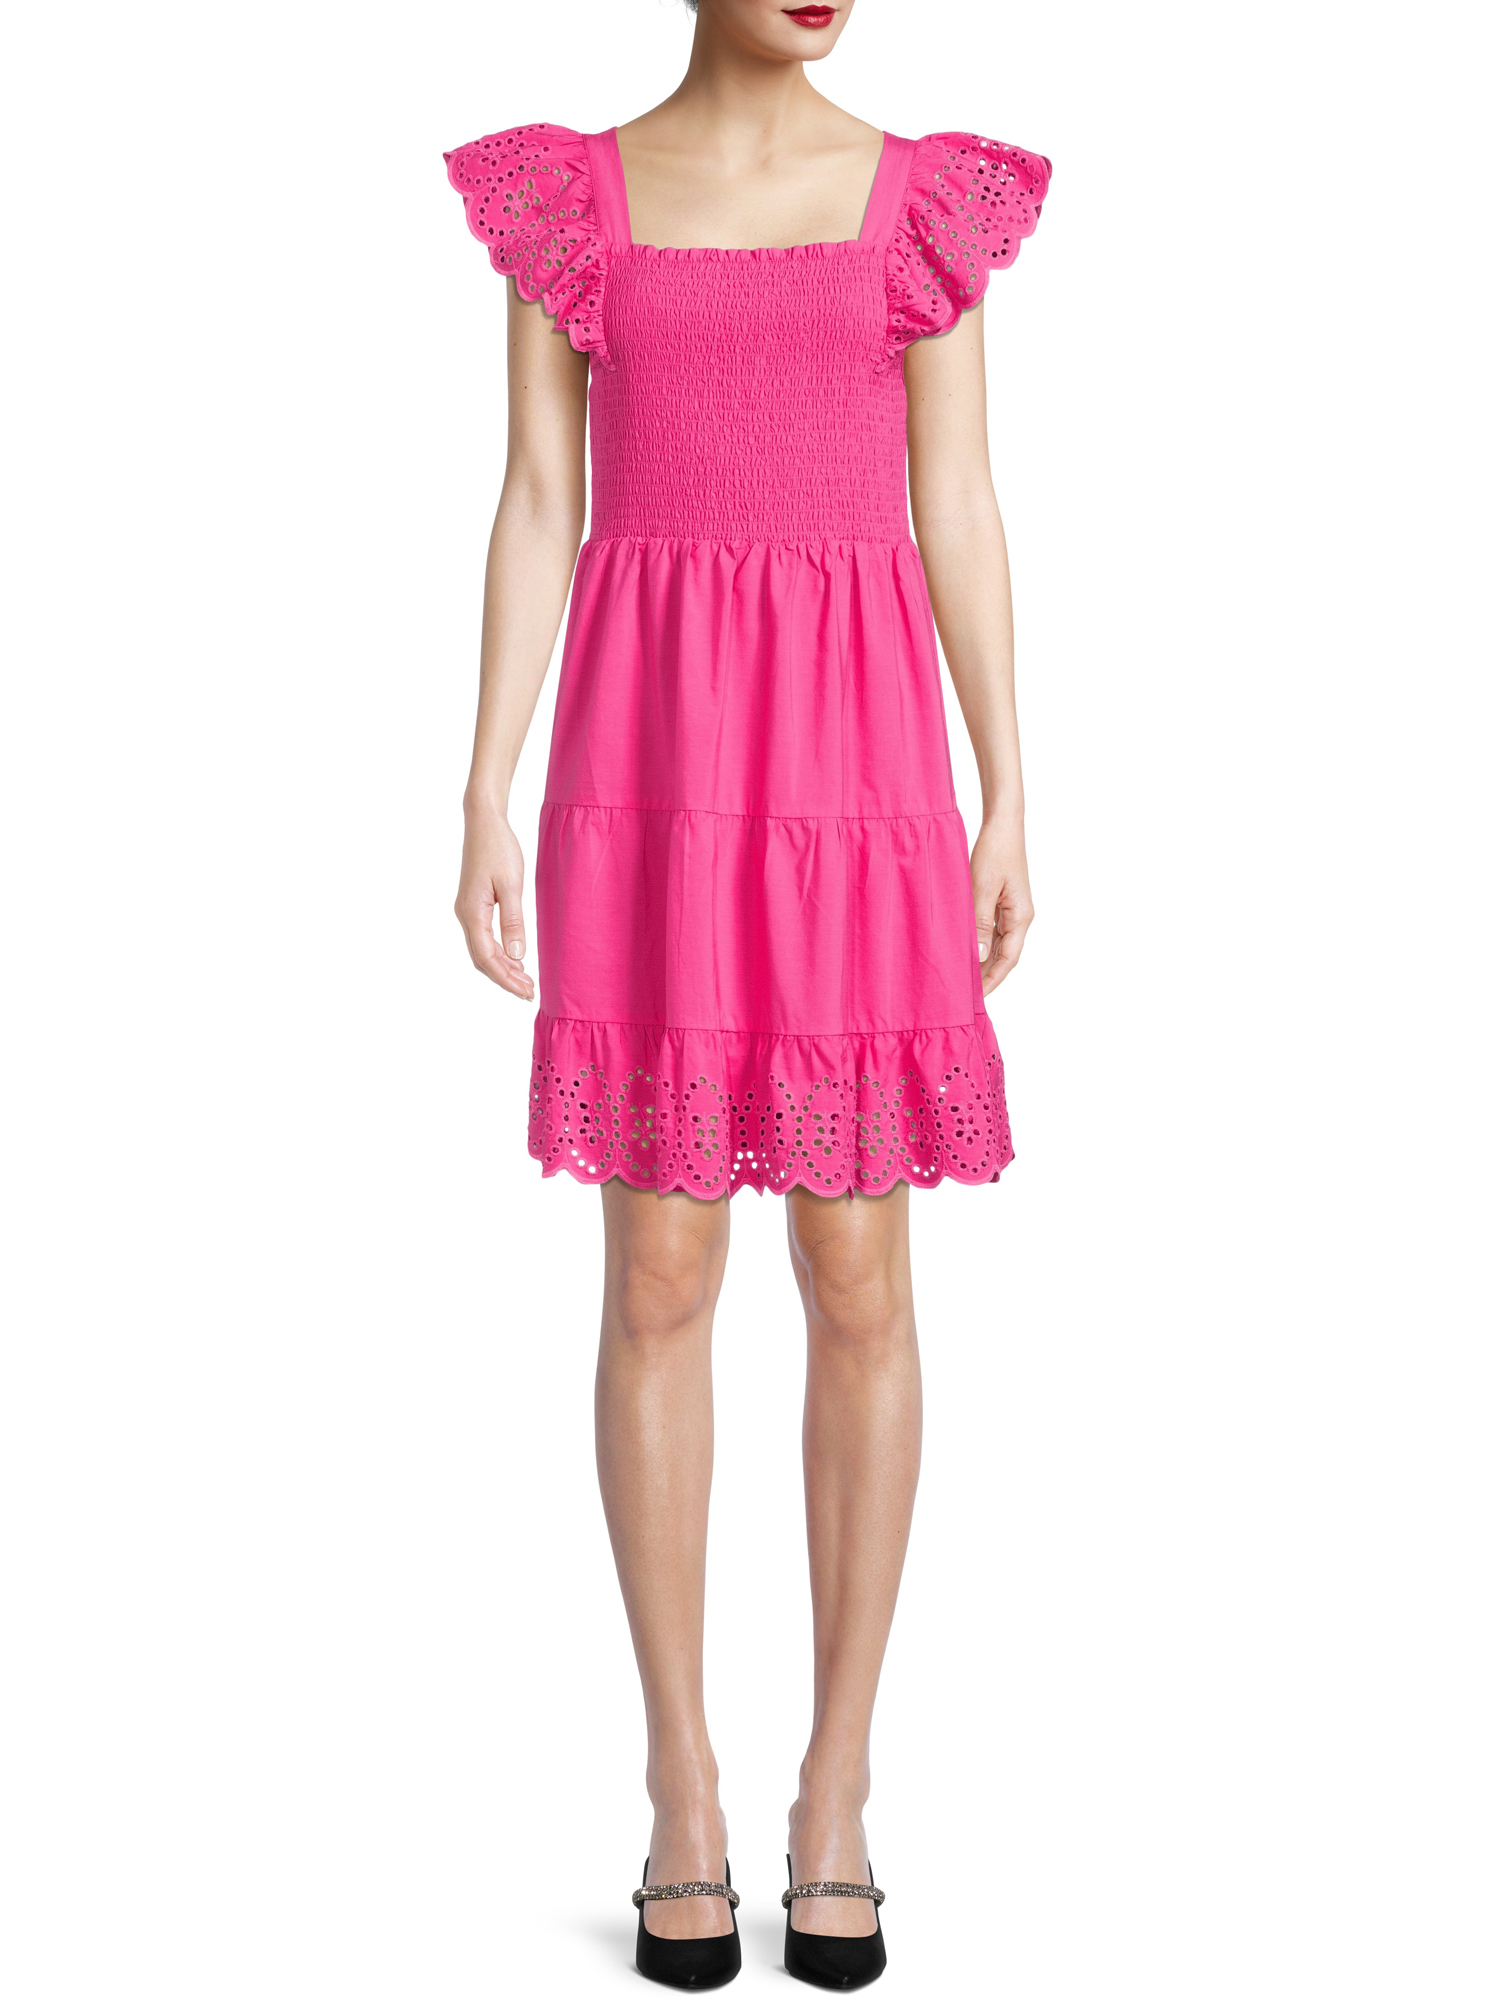 Time And Tru Women's Smocked Eyelet Dress - image 5 of 5